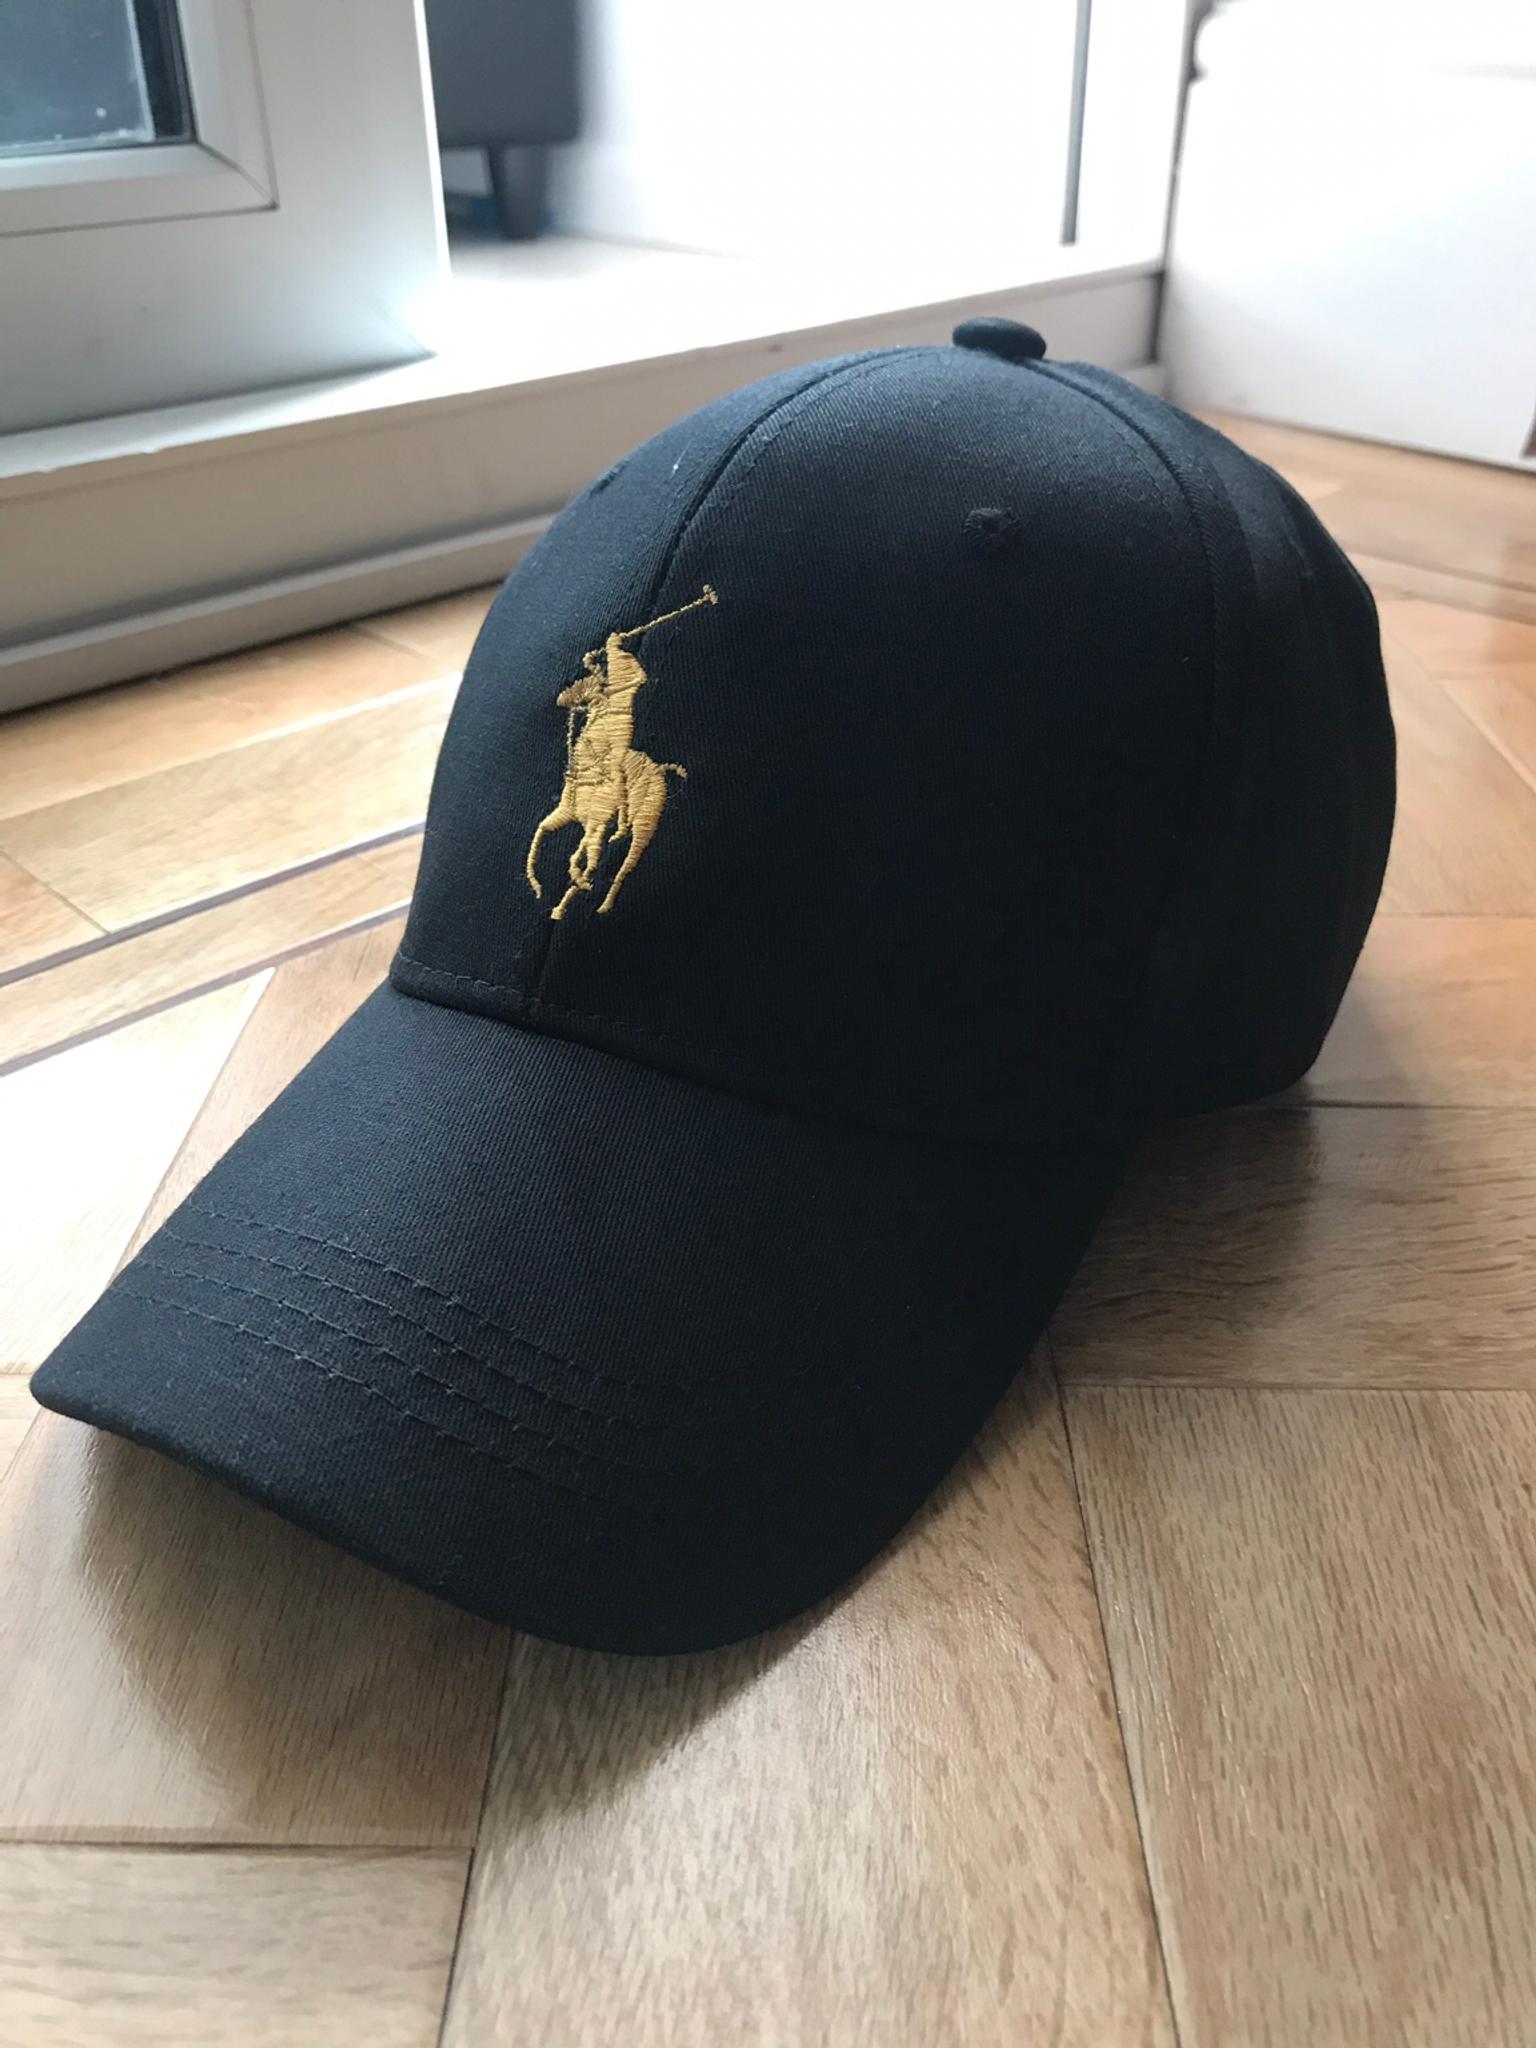 black and gold polo hat